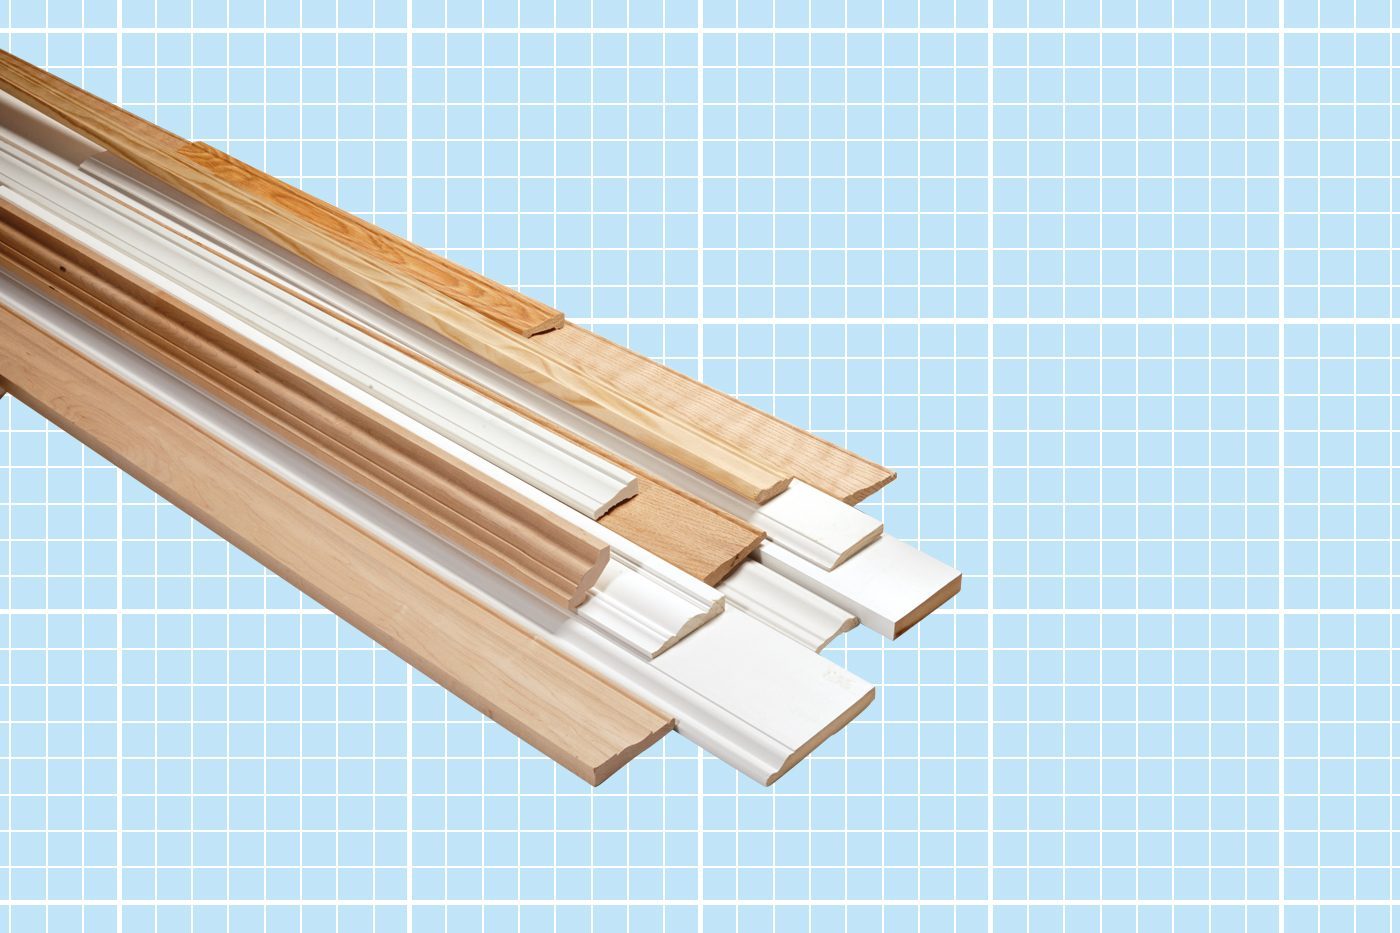 6 Tips for Buying Wood Trim That Will Save Time and Money